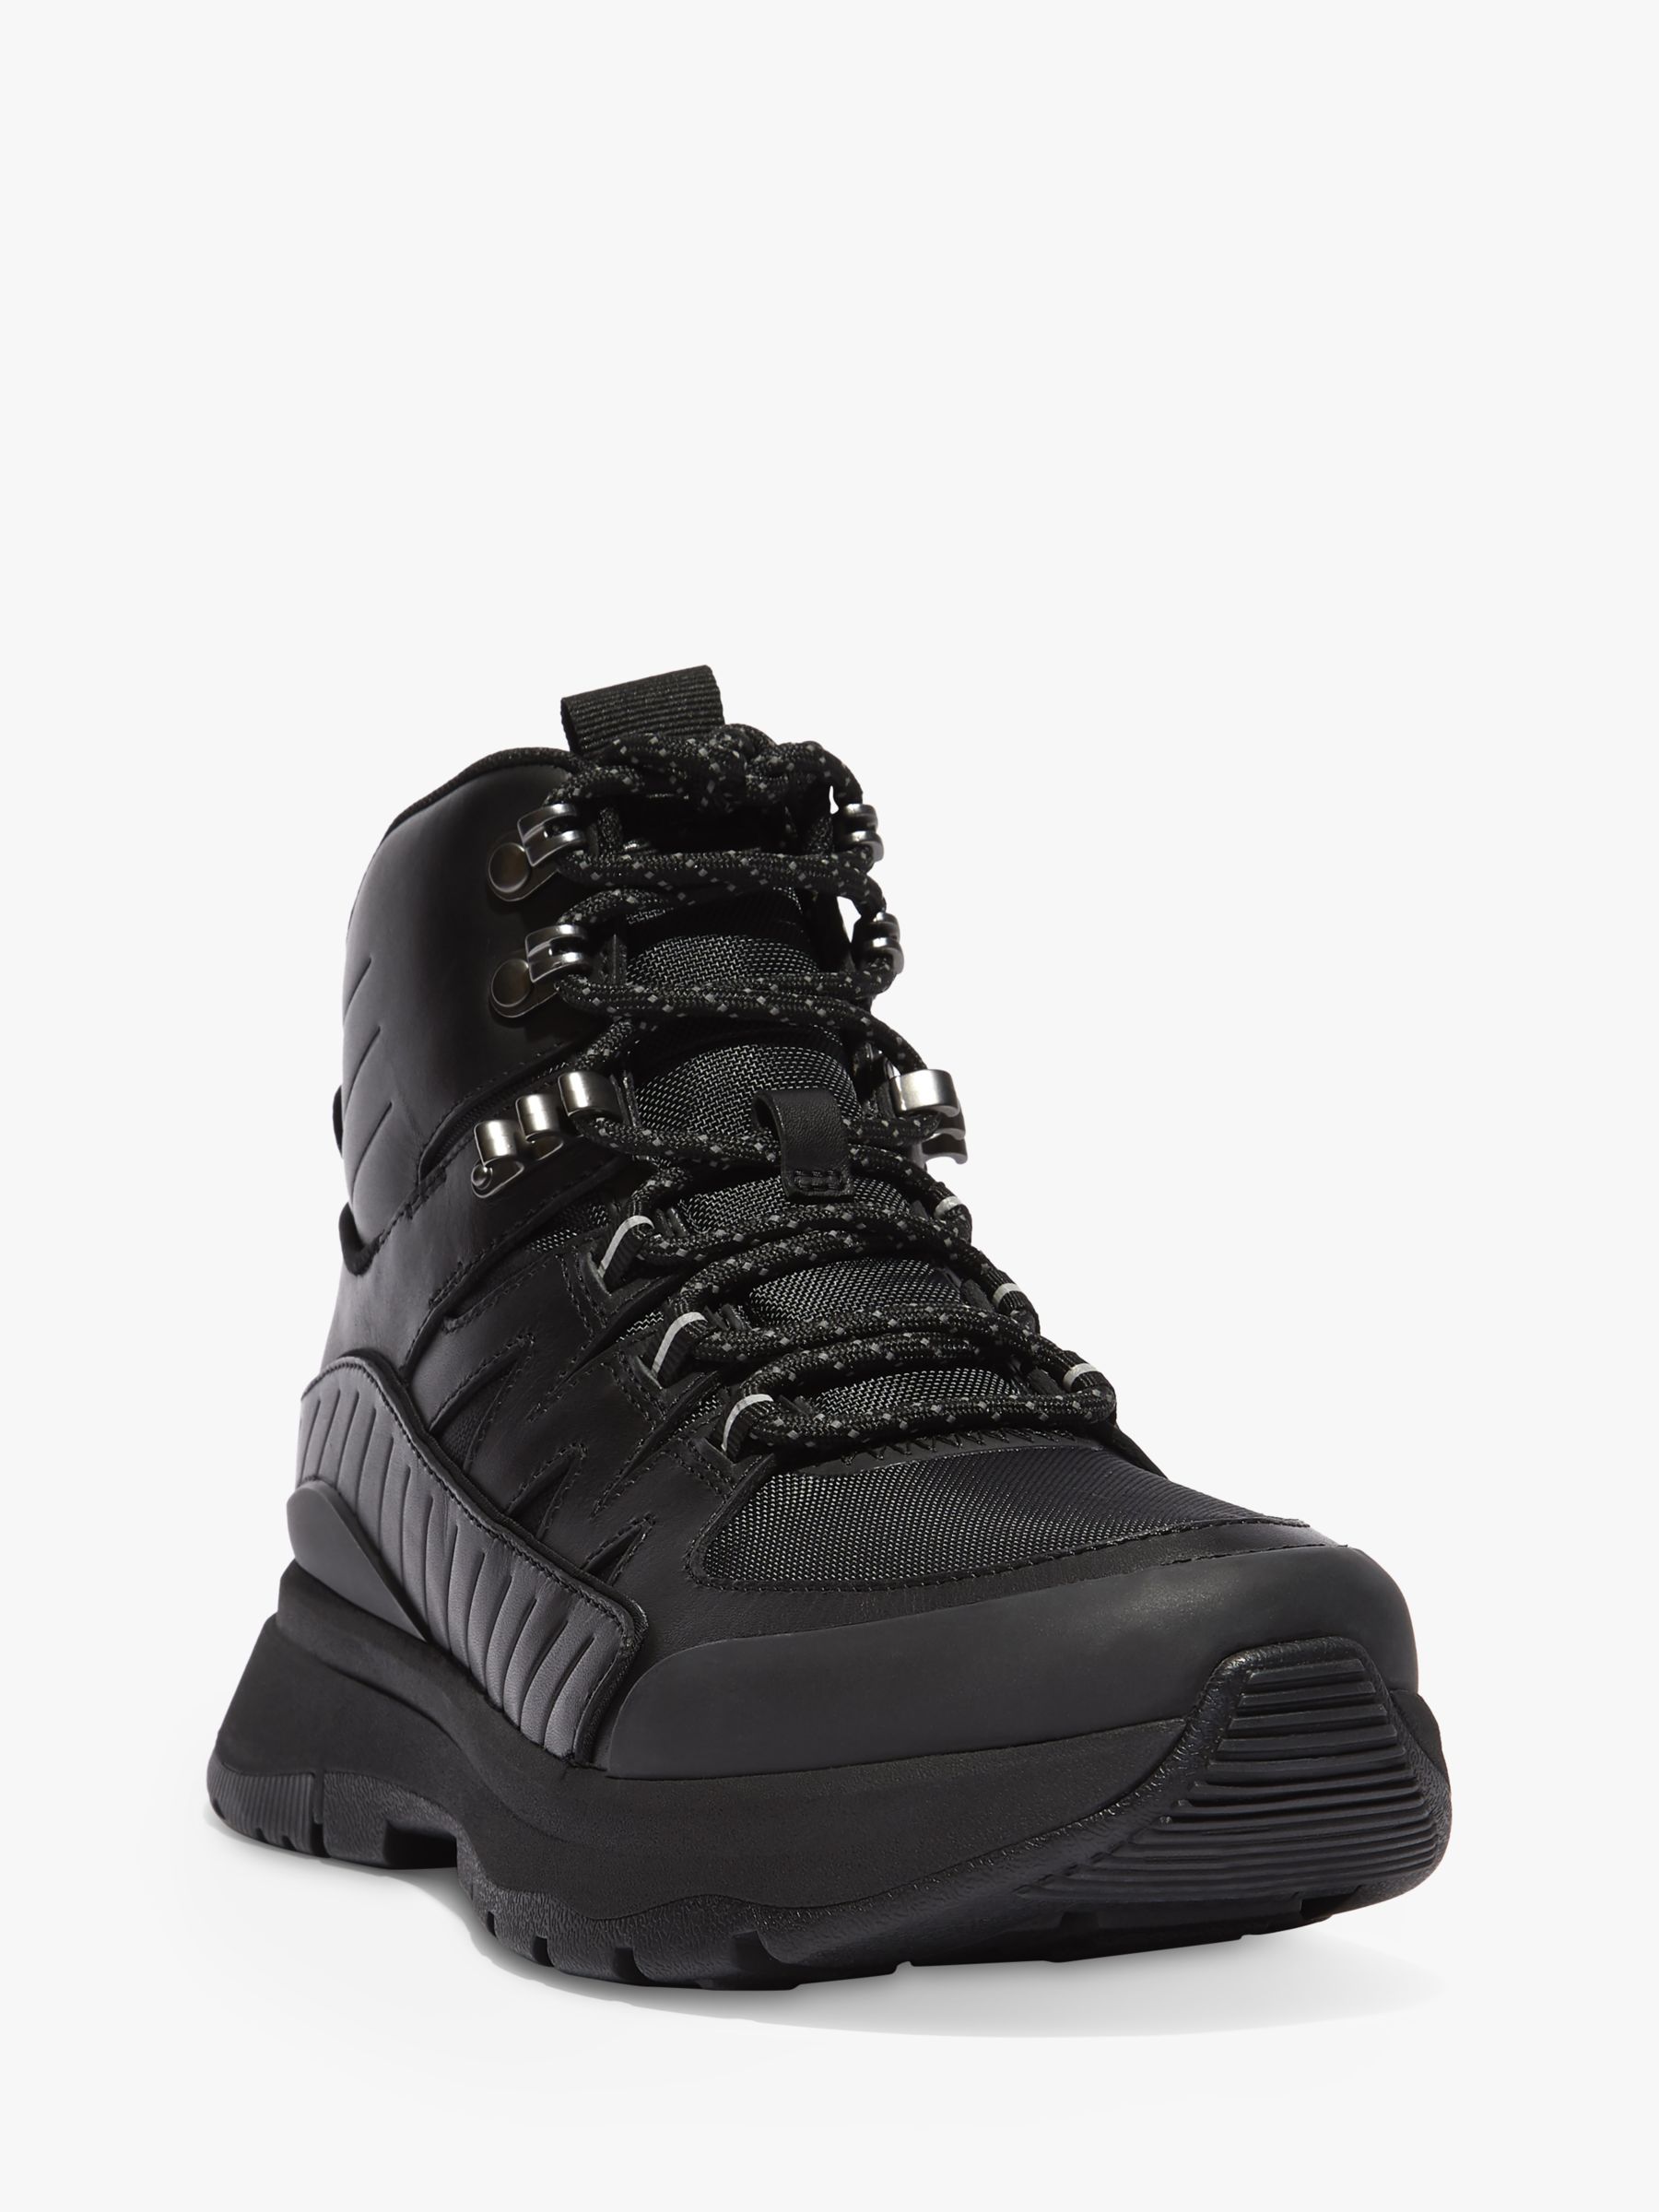 FitFlop Neo Leather Mix Hiking Boots, All Black at John Lewis & Partners